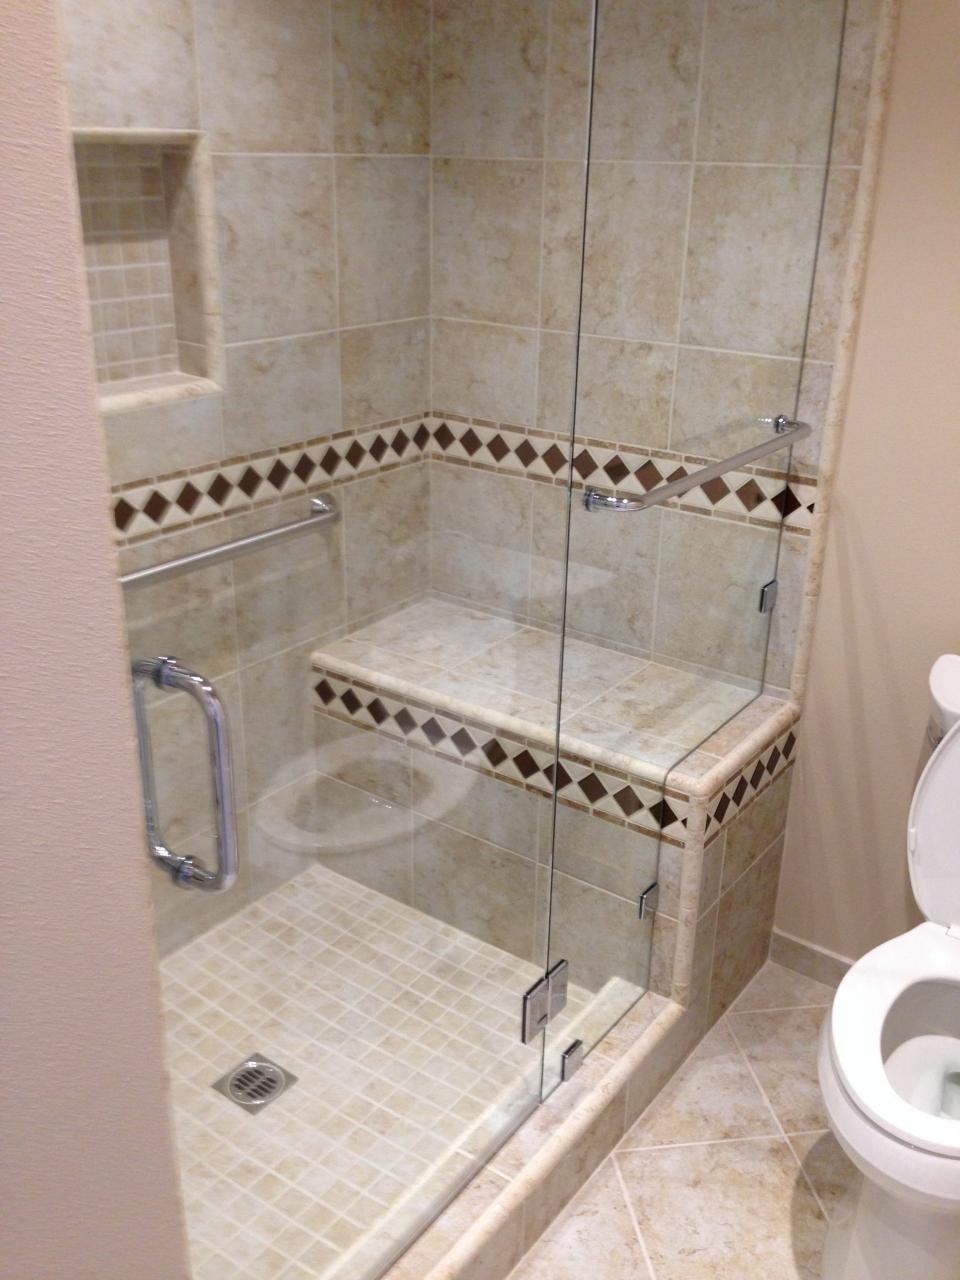 How Do You Remodel a Shower? Shower Remodel Contractors Near Me